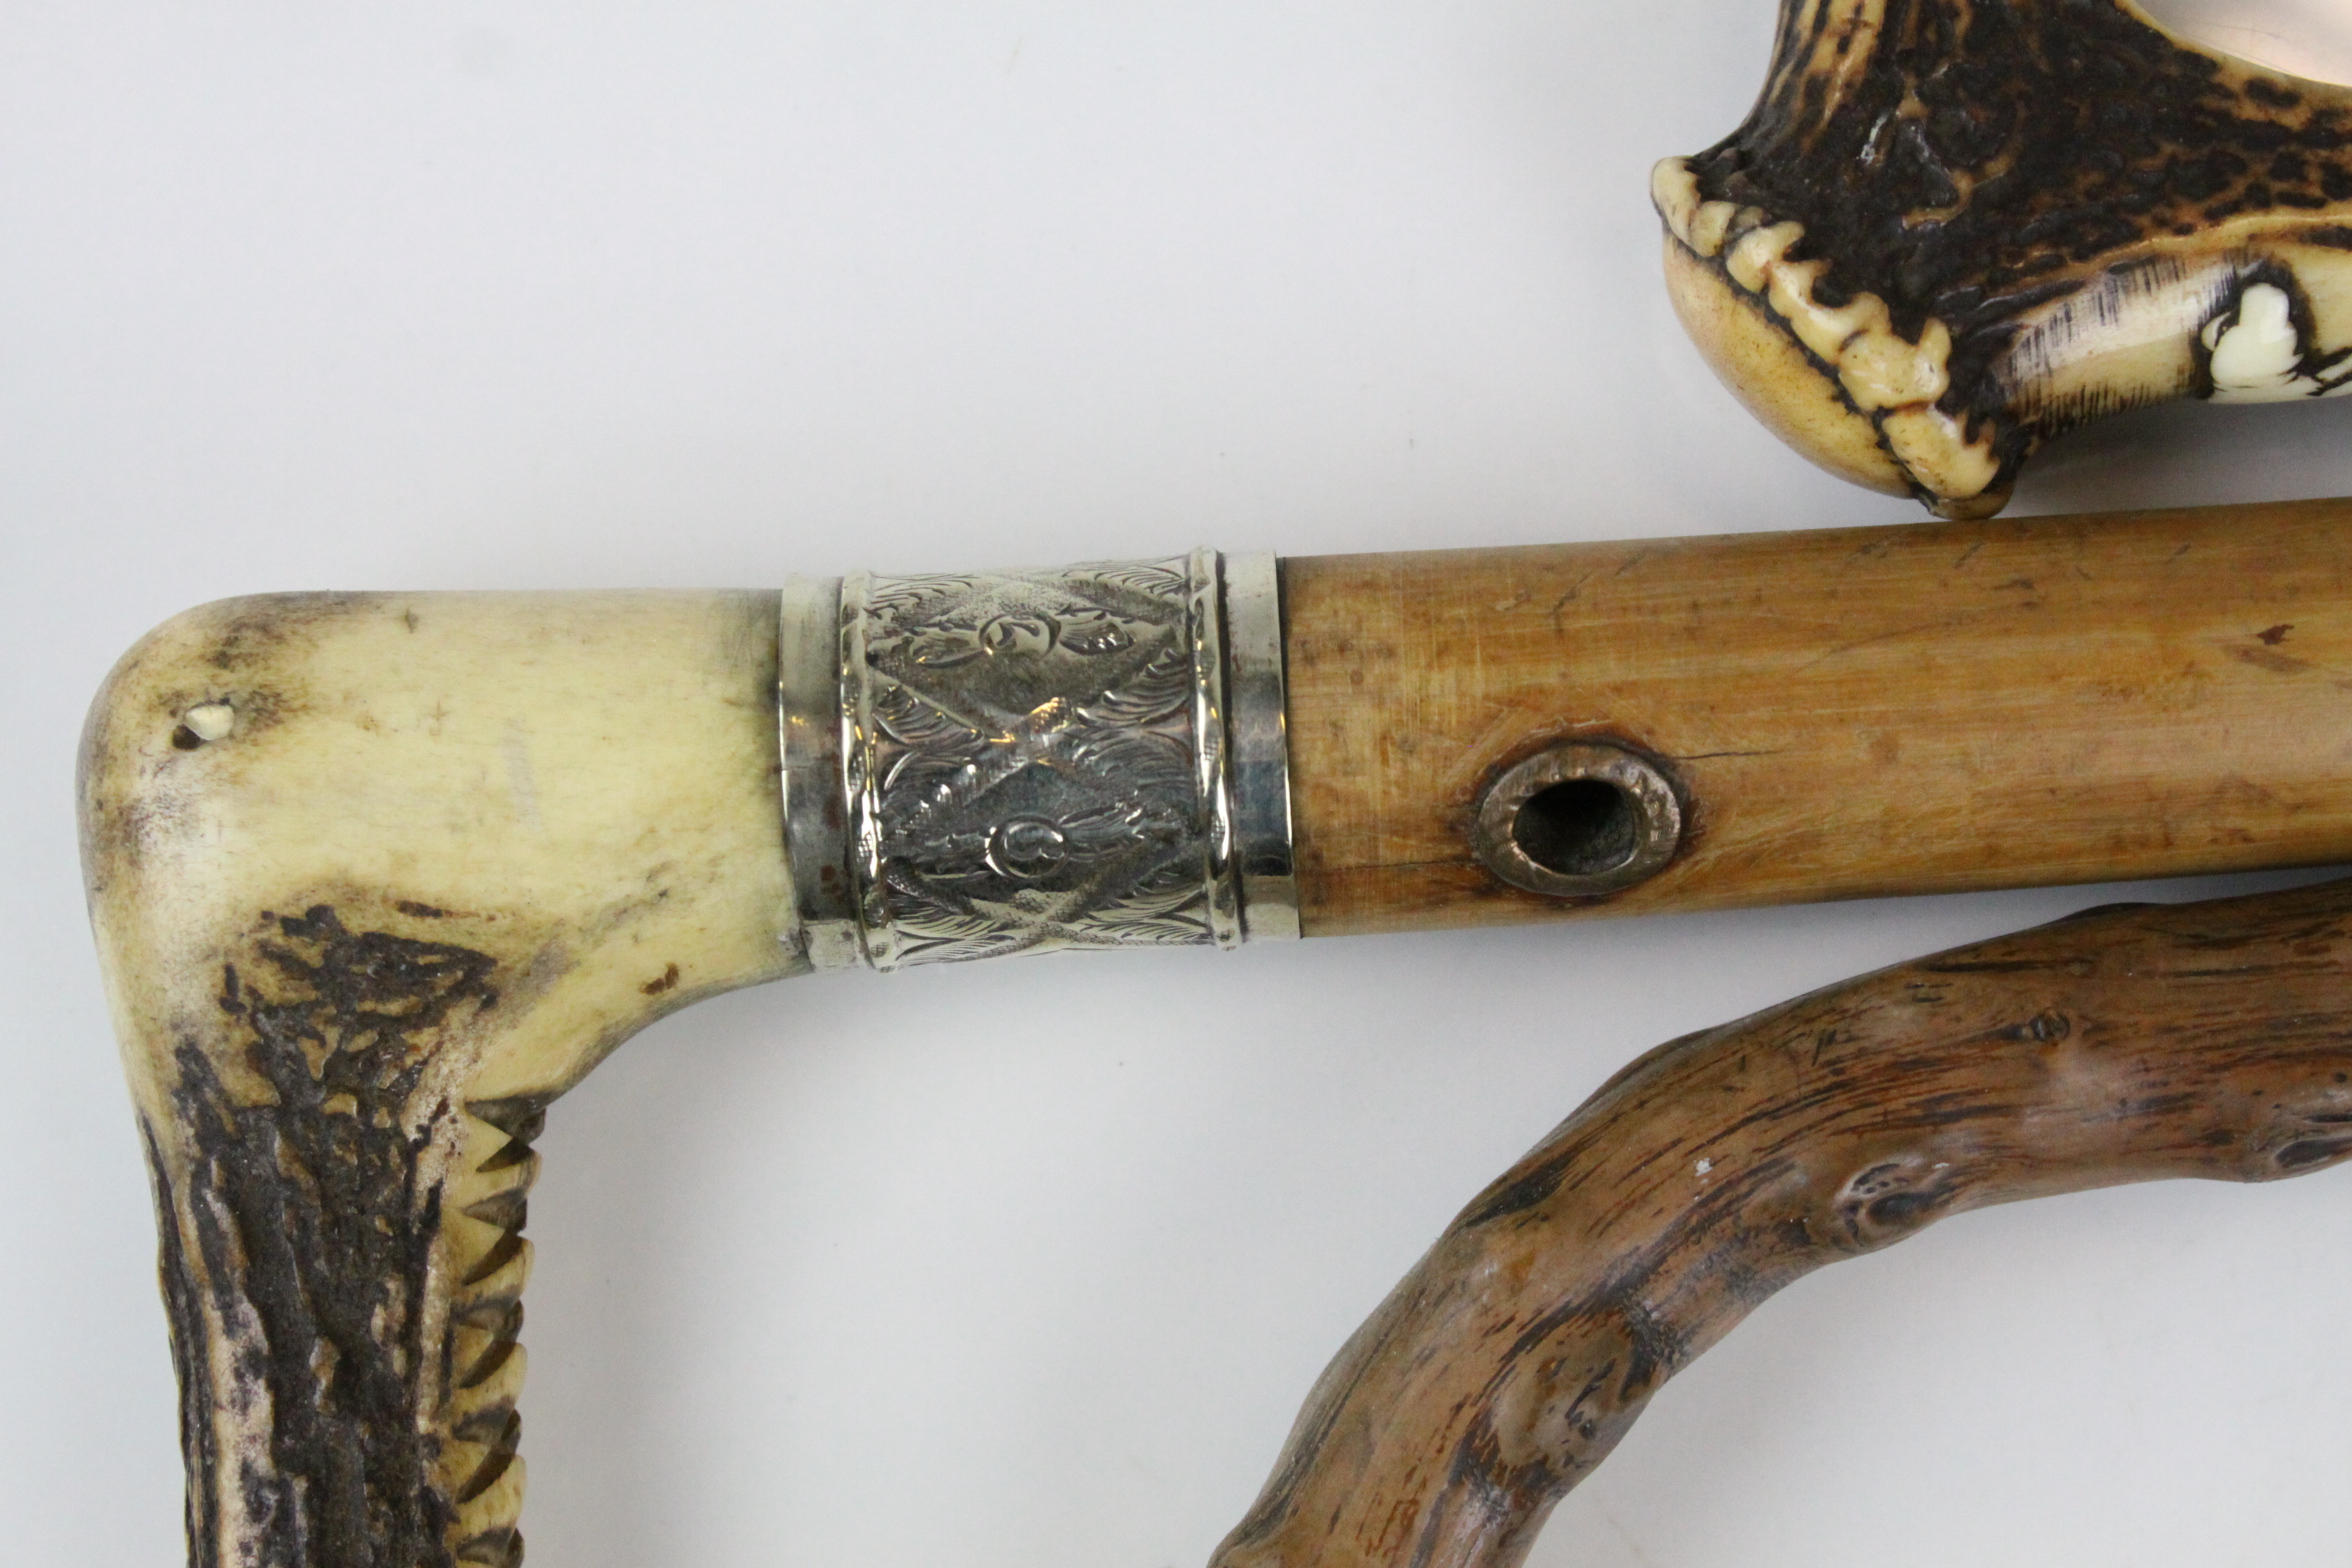 Three Walking Sticks - one with Dog, one with Silver Collar and one Rustic - Image 3 of 4